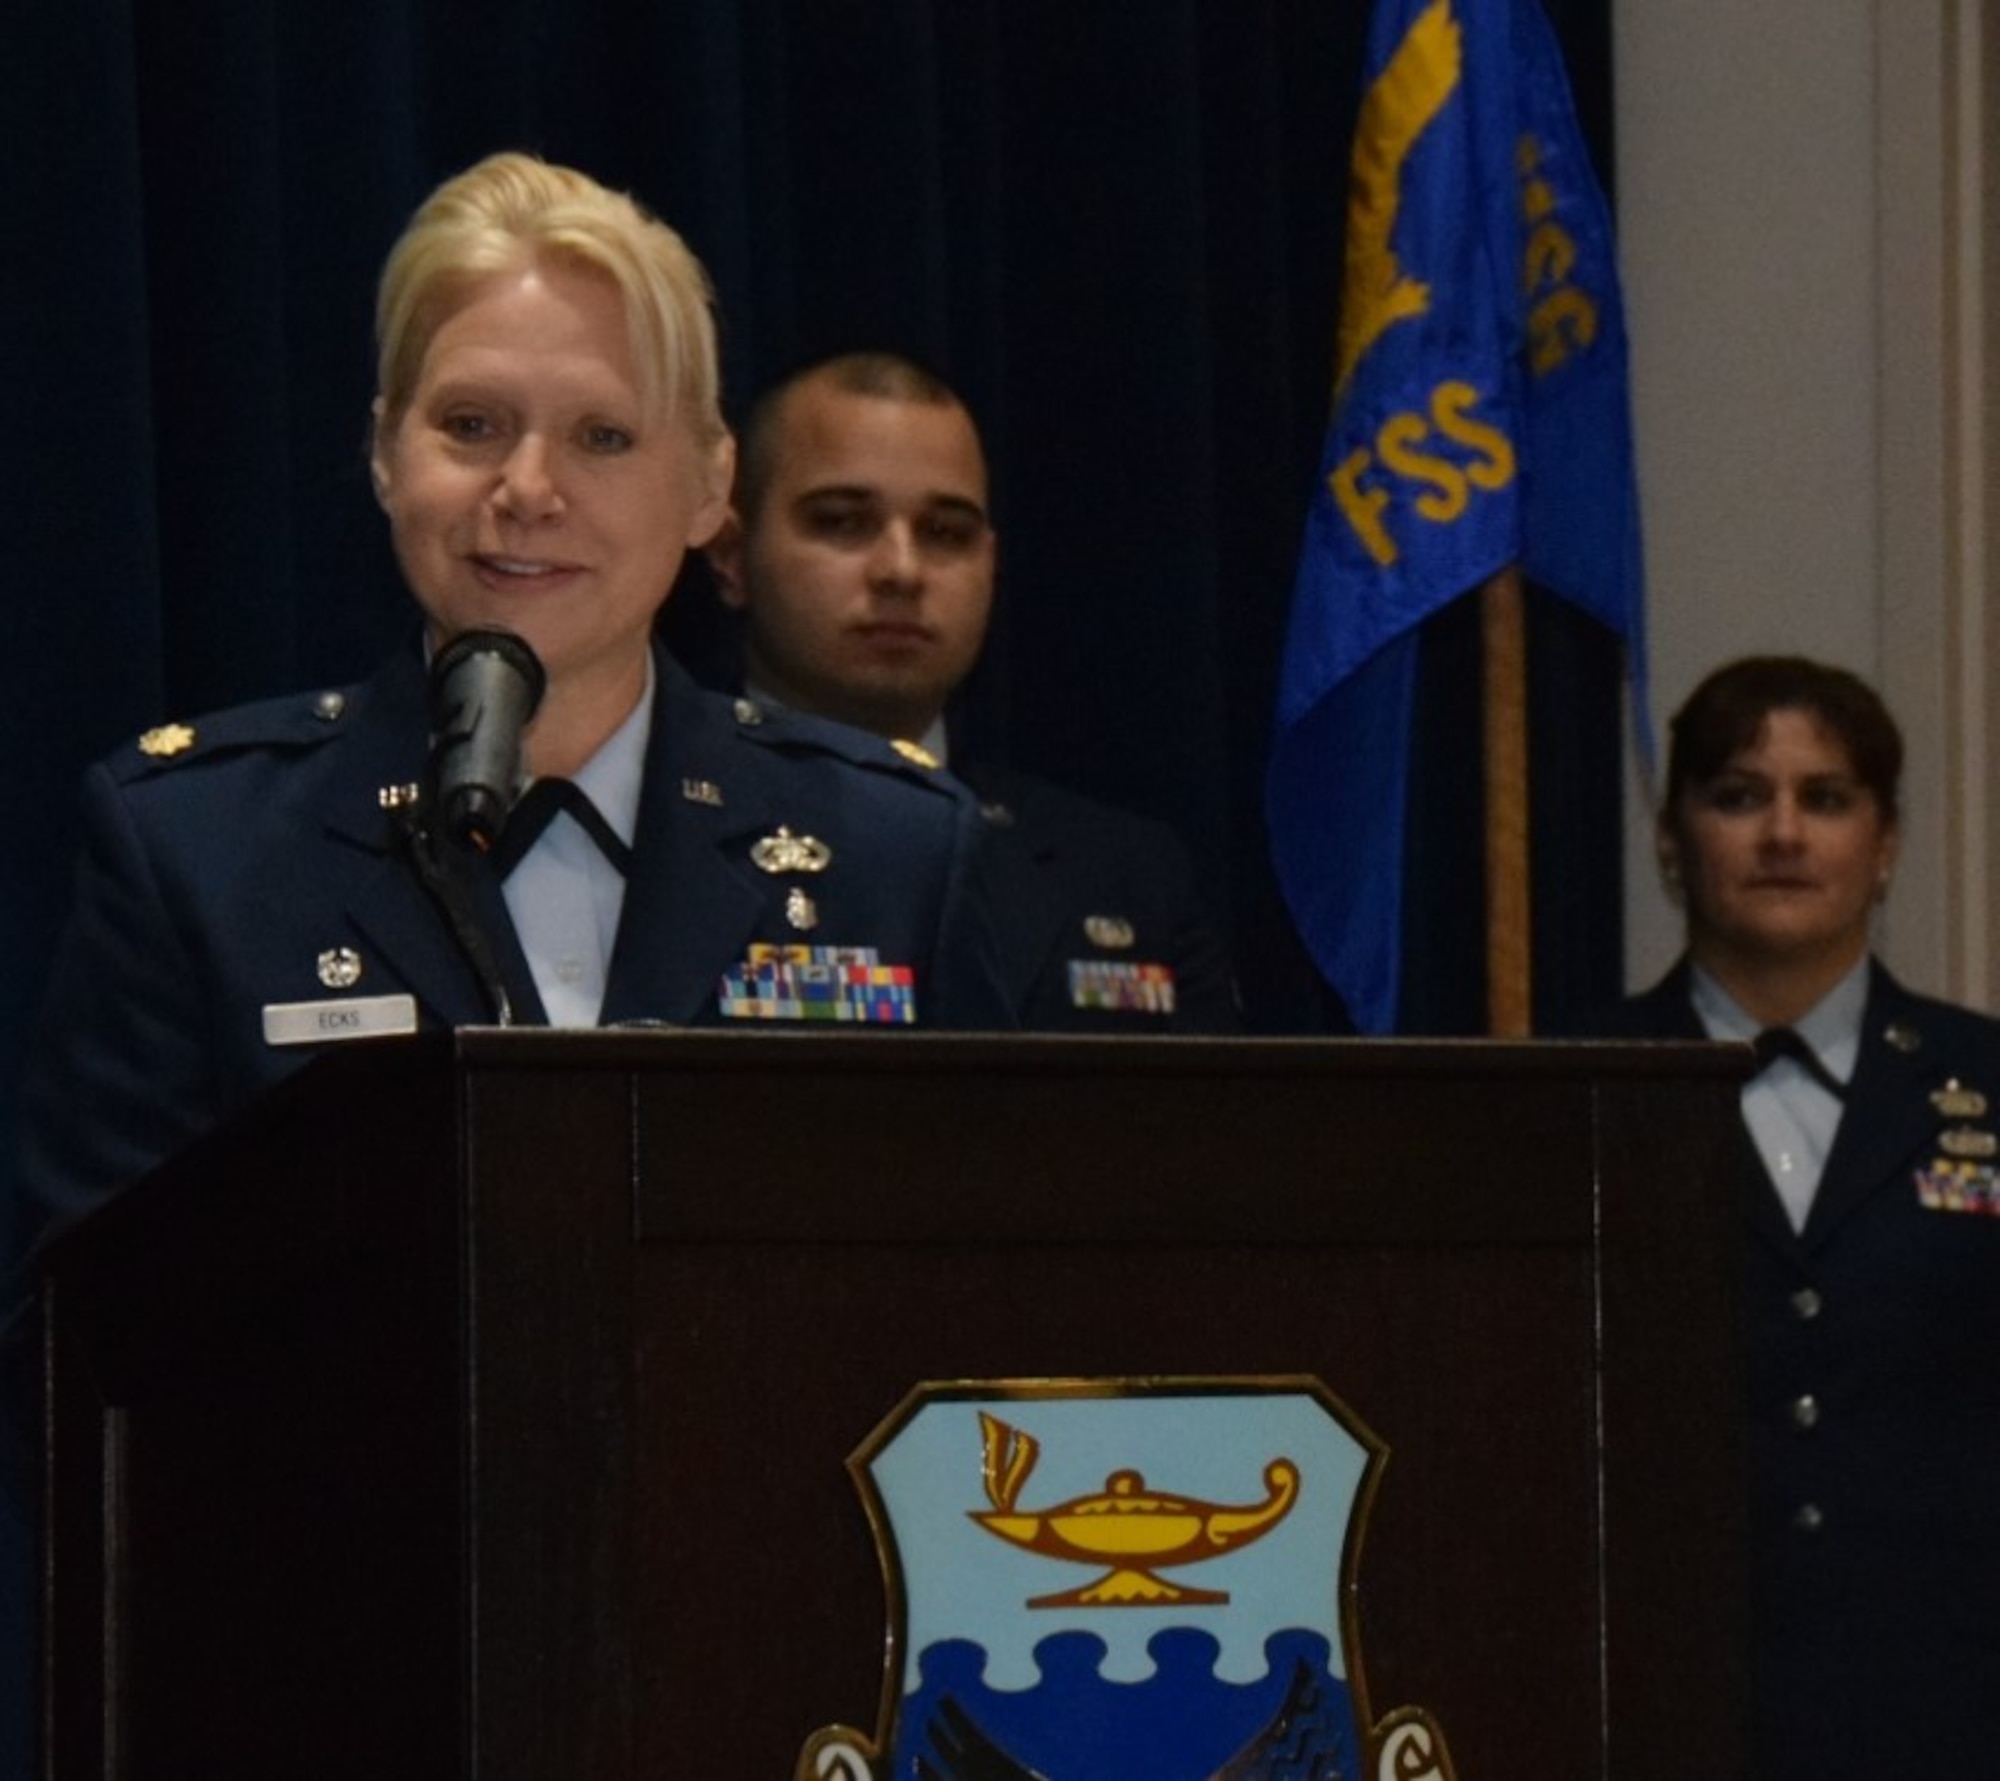 Maj. Robin L. Ecks, 433rd Force Support Squadron commander, speaks to the audience during her assumption of command ceremony held at the Inter American Air Force Academy auditorium Jan. 20, 2018 on Joint Base San Antonio-Lackland, Texas. (U.S. Air Force photo by Tech Sgt. Carlos J. Treviño)